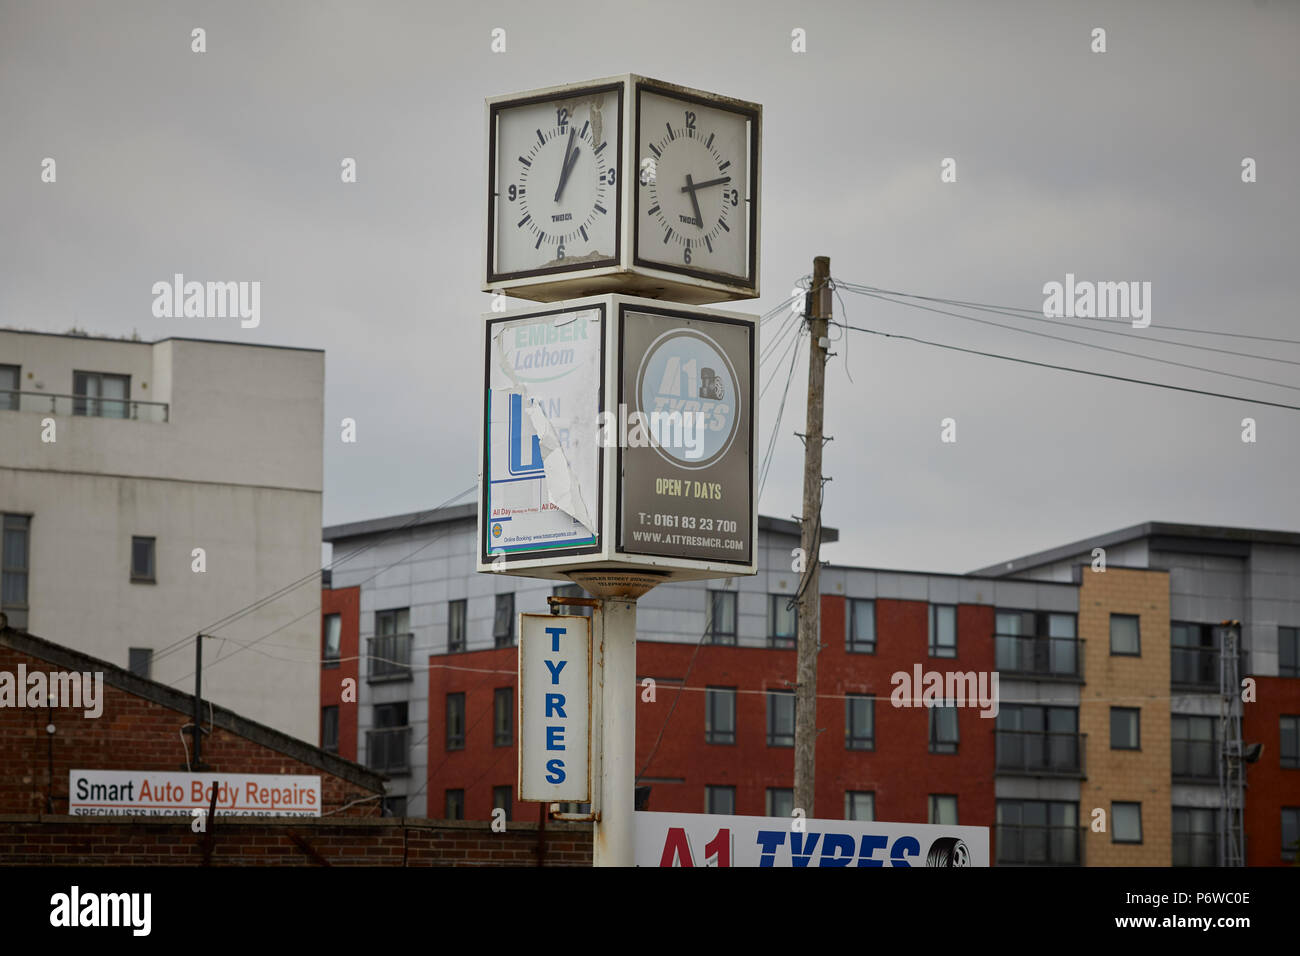 A1 tyres 87 Rochdale Road  Collyhurst square cube clock at the entrance Stock Photo